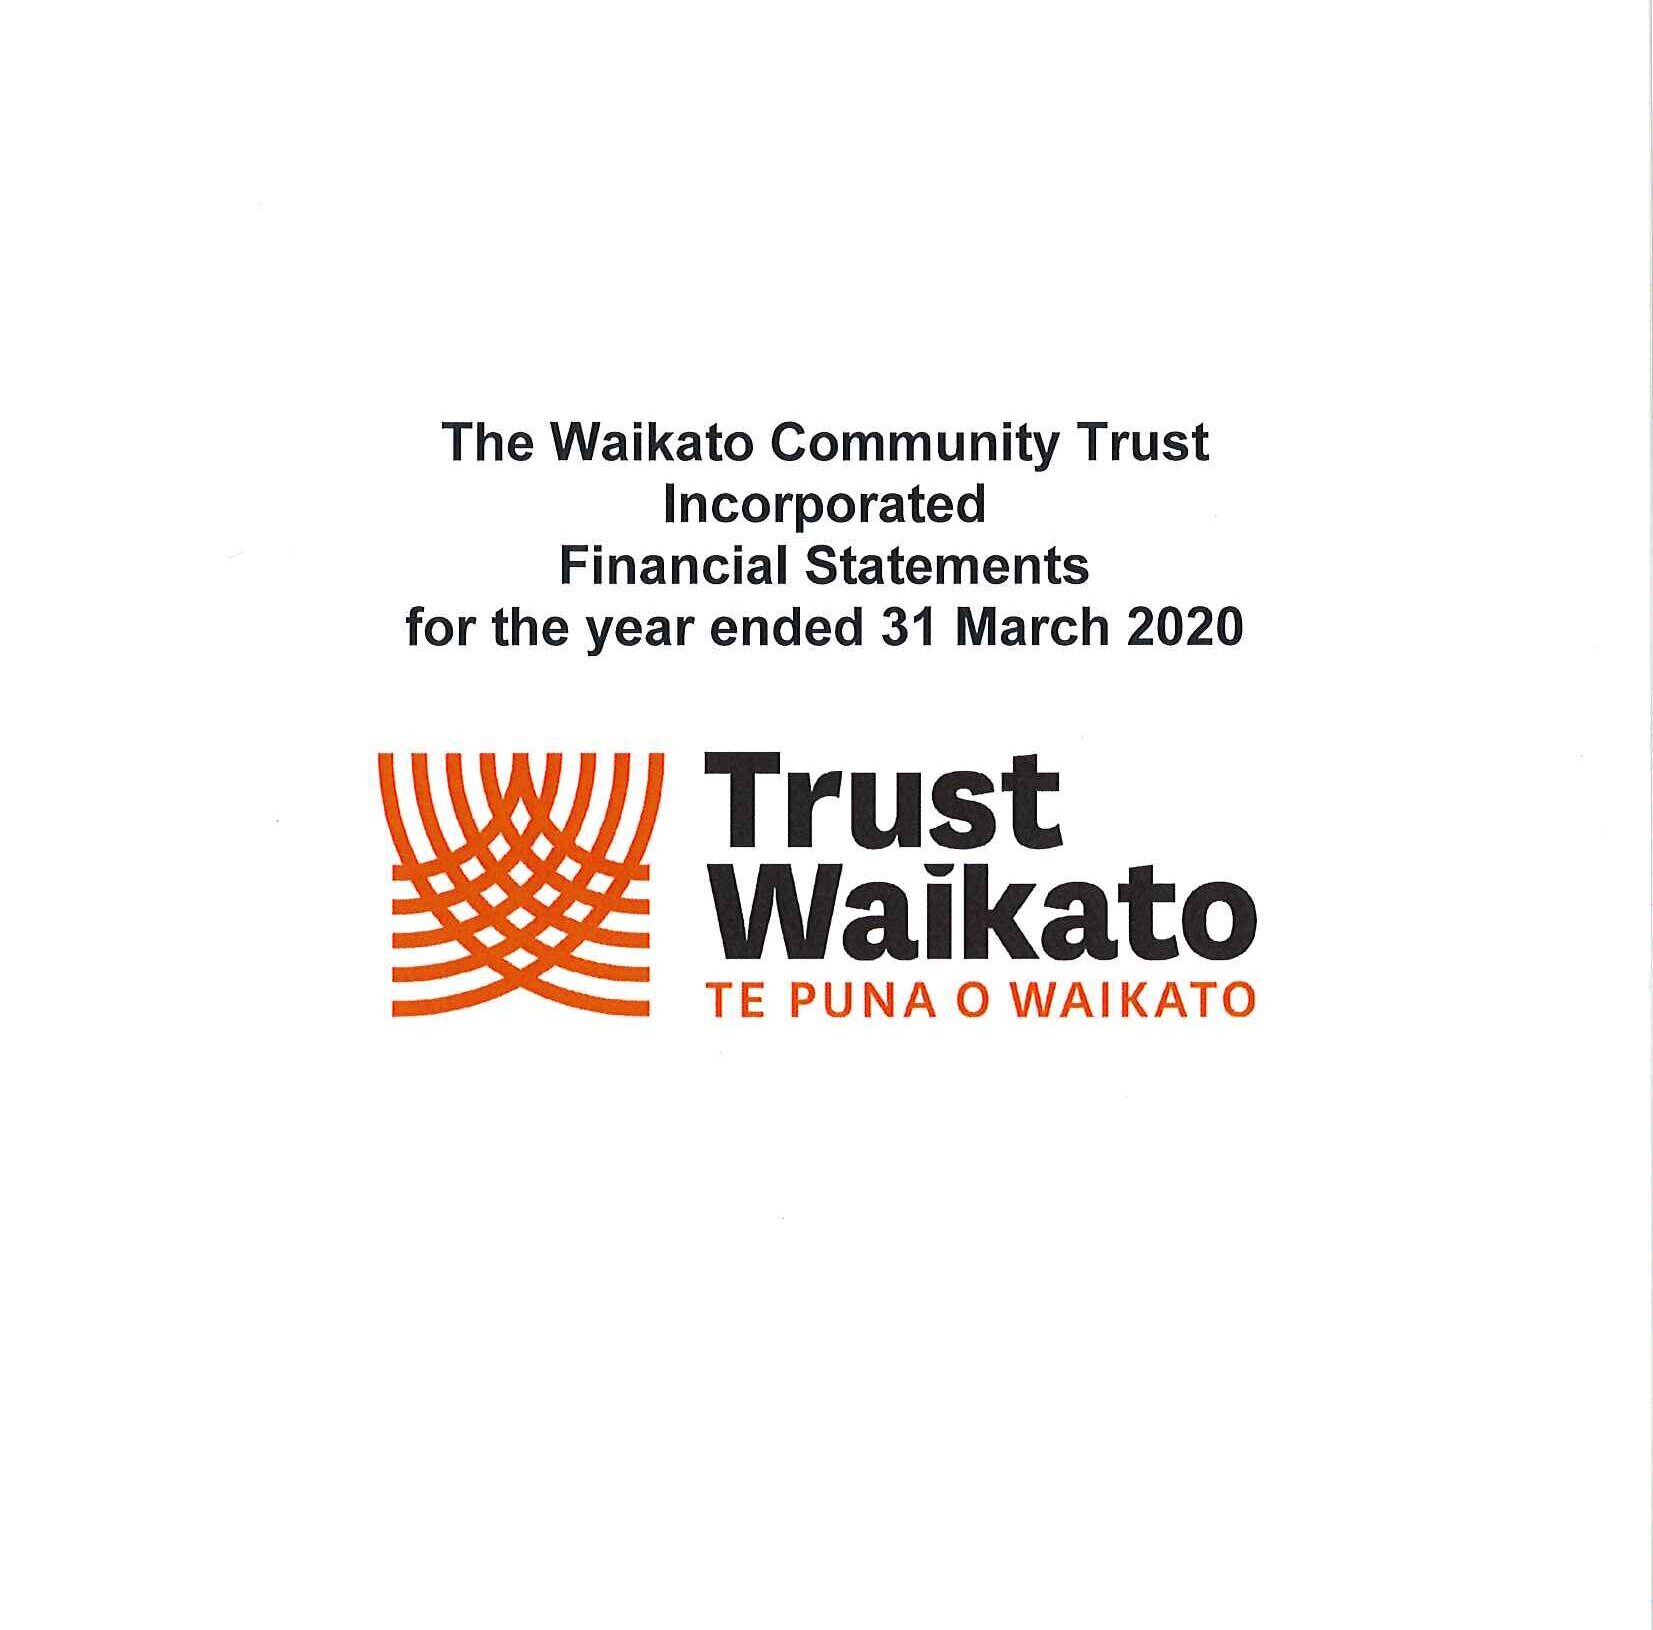 The Waikato Community Trust Incorporated Financial Statements for the year ended 31 March 2020